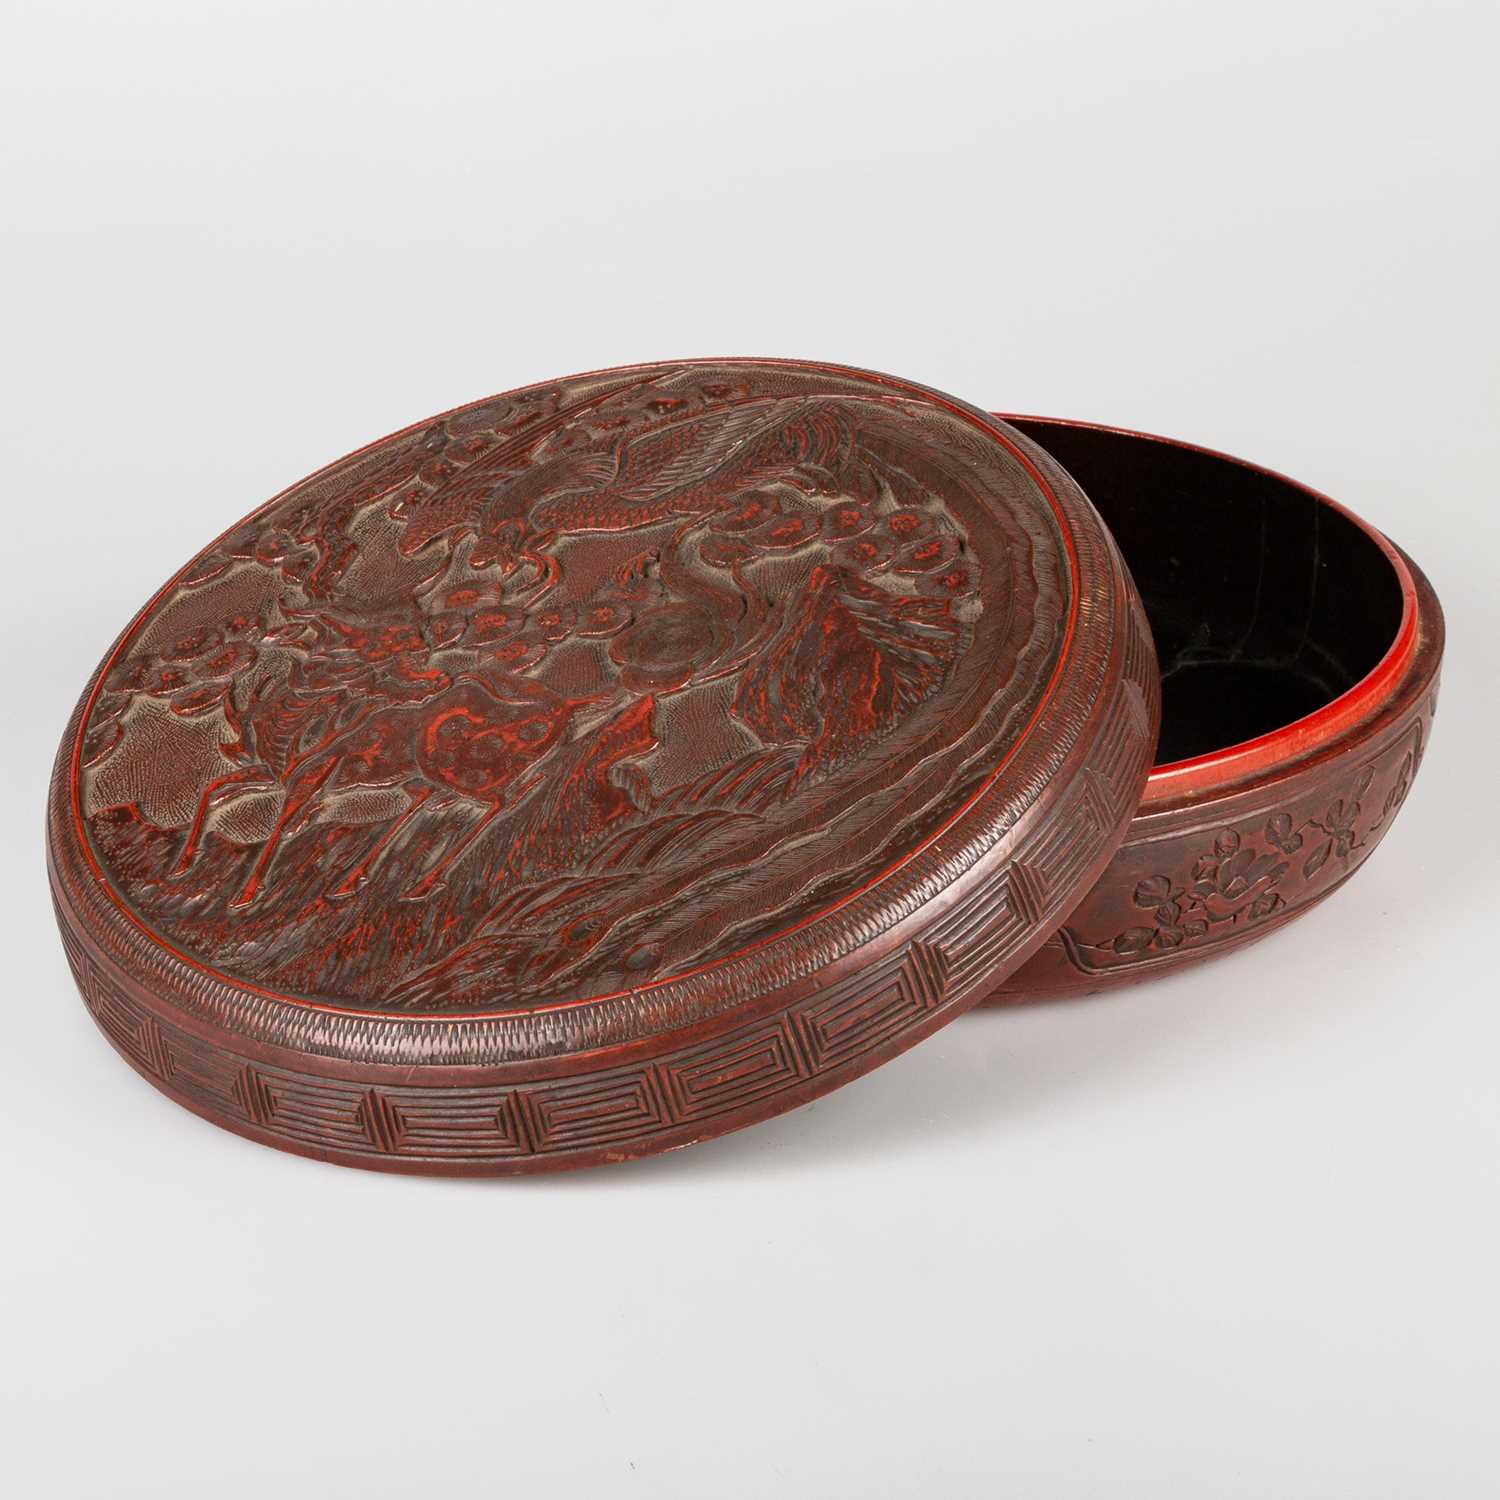 A CHINESE RED CINNABAR LACQUER BOX AND COVER, QING DYNASTY - Image 2 of 8